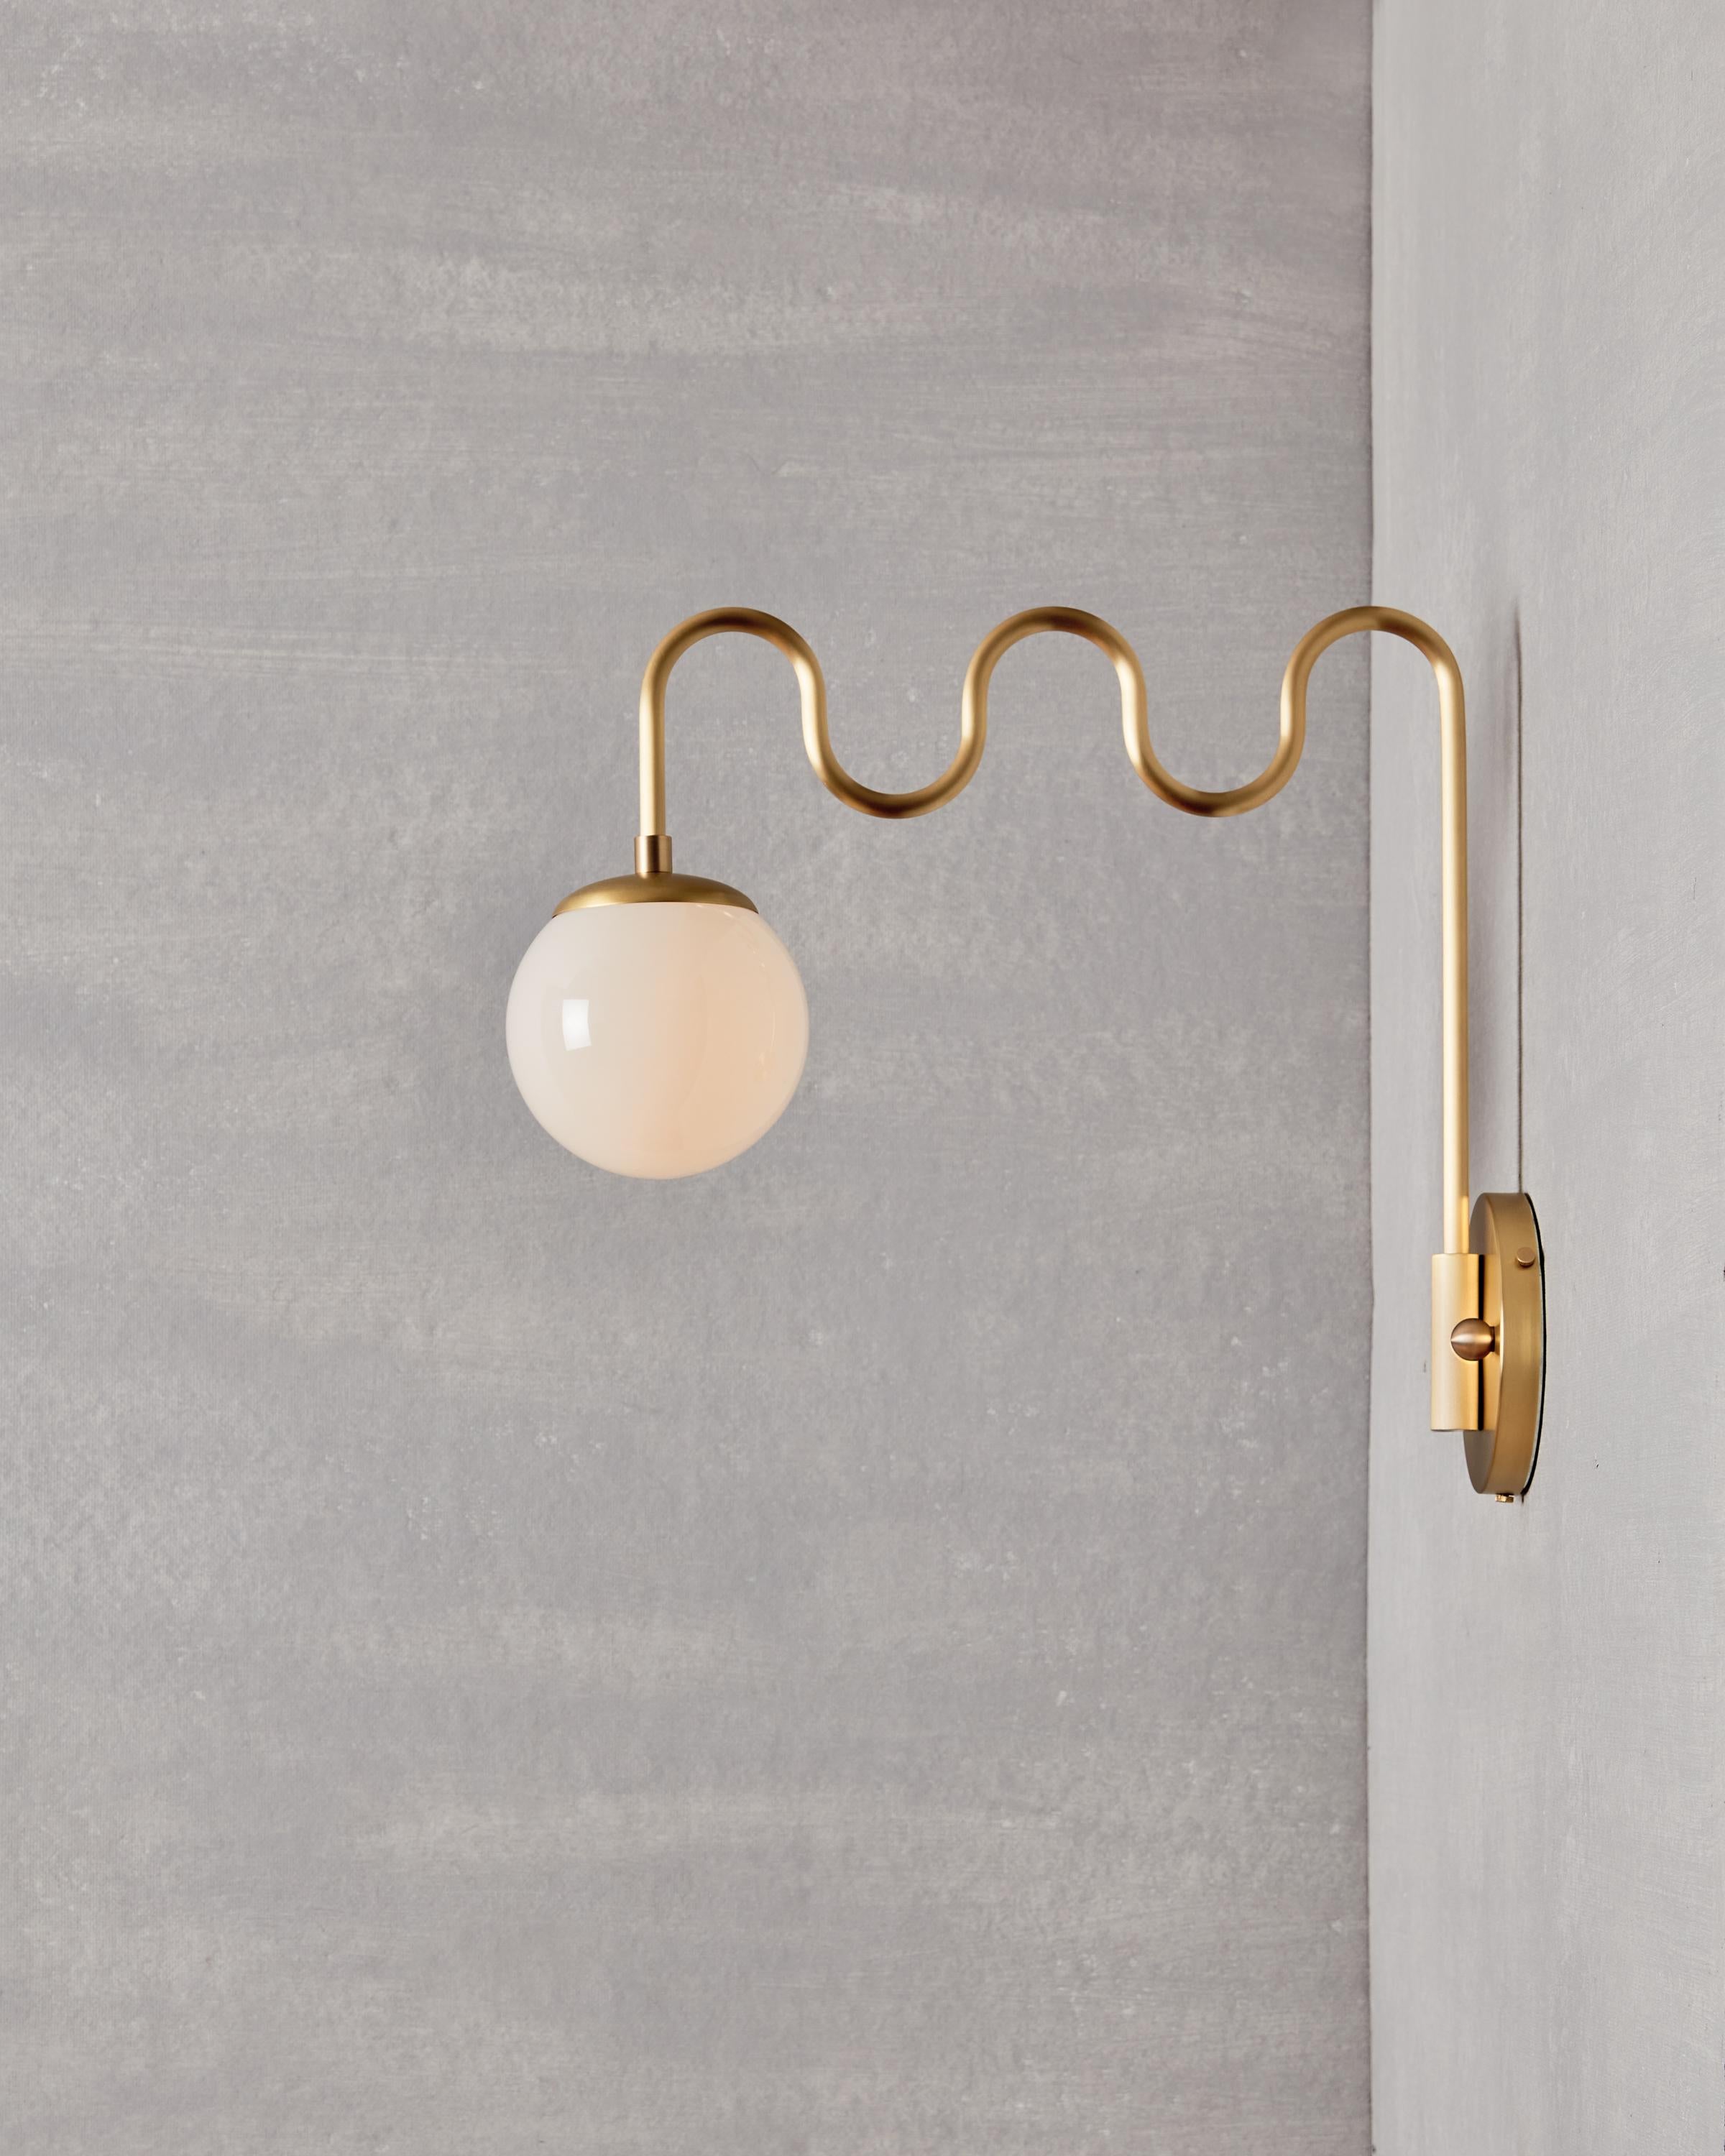 Form and function meet with the Cecil Sconce’s undulating bent brass arm and swiveling backplate. Choose either a milk glass globe for ambiance or a clear glass globe for maximum illumination. 

OVERALL DIMENSIONS
17.75